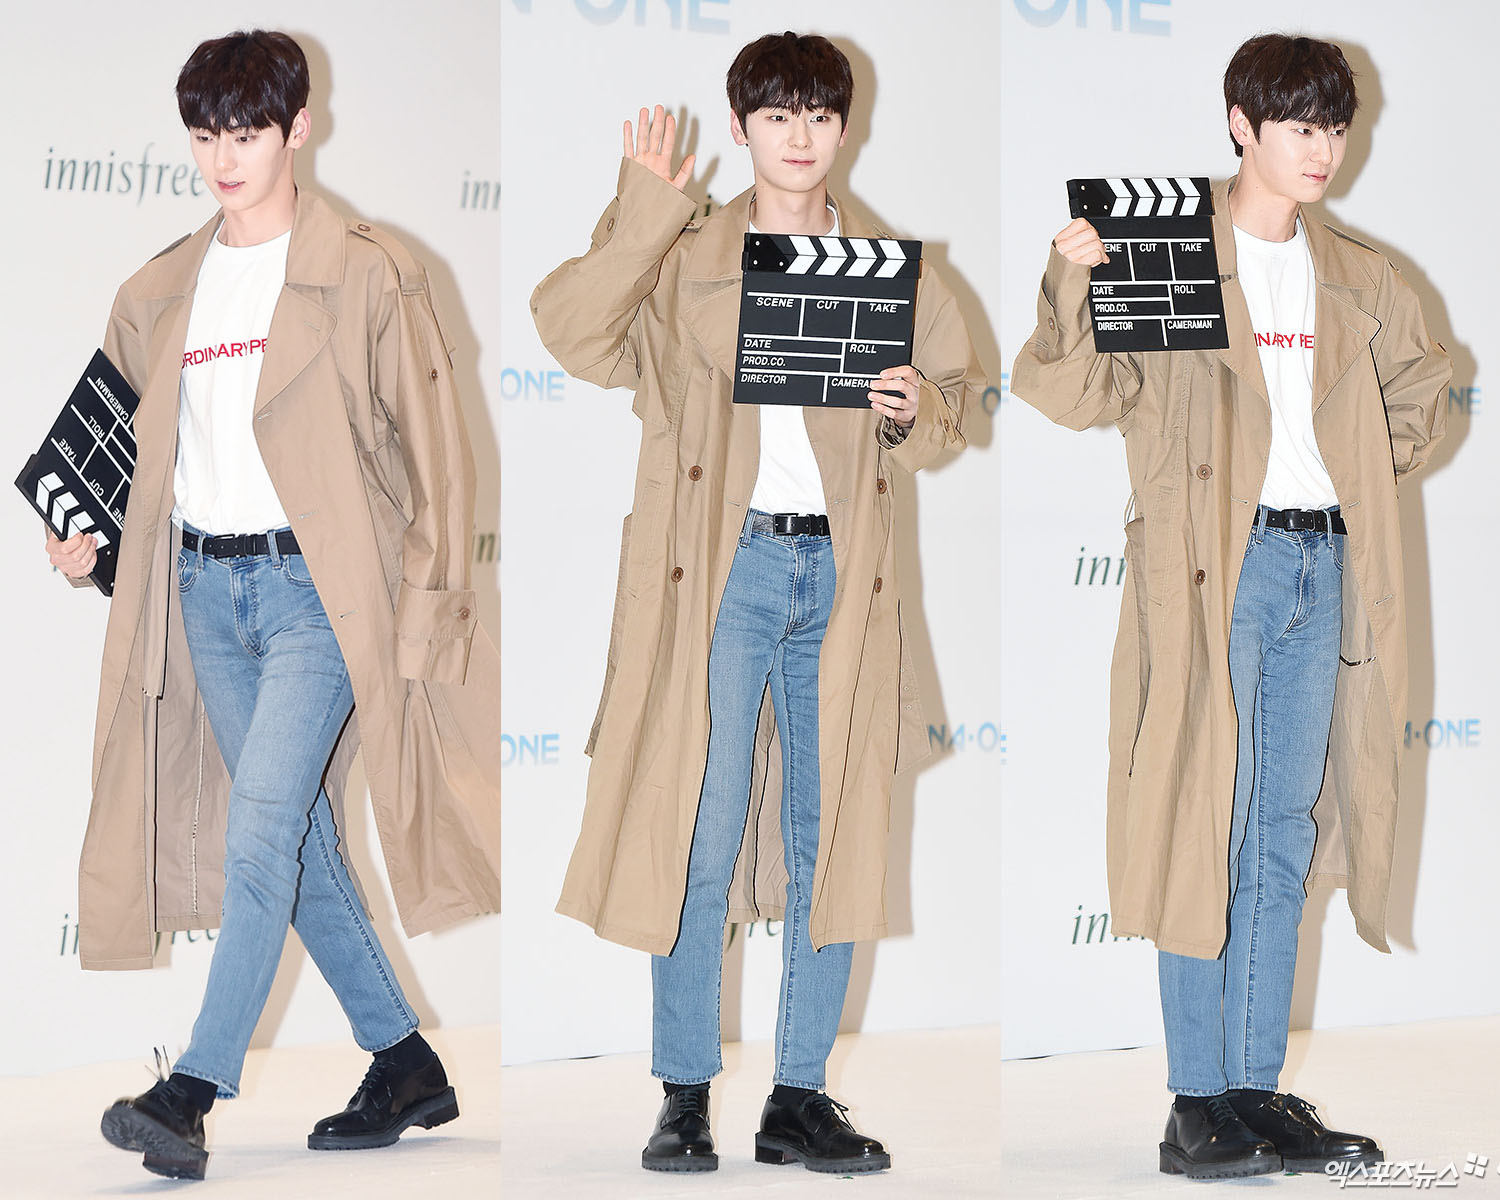 Wanna One Hwang Min-hyun, who attended the Wanna One Fan signing event event ceremony held at Innisfree headquarters in Yongsan-gu, Seoul on the afternoon of the 28th, has a photo time.  Trench coat flying  Campus is a senior  Face is genre and movie itself  Five stars, five hundred stars out of five points  This face, thumb chuck  Visual A +